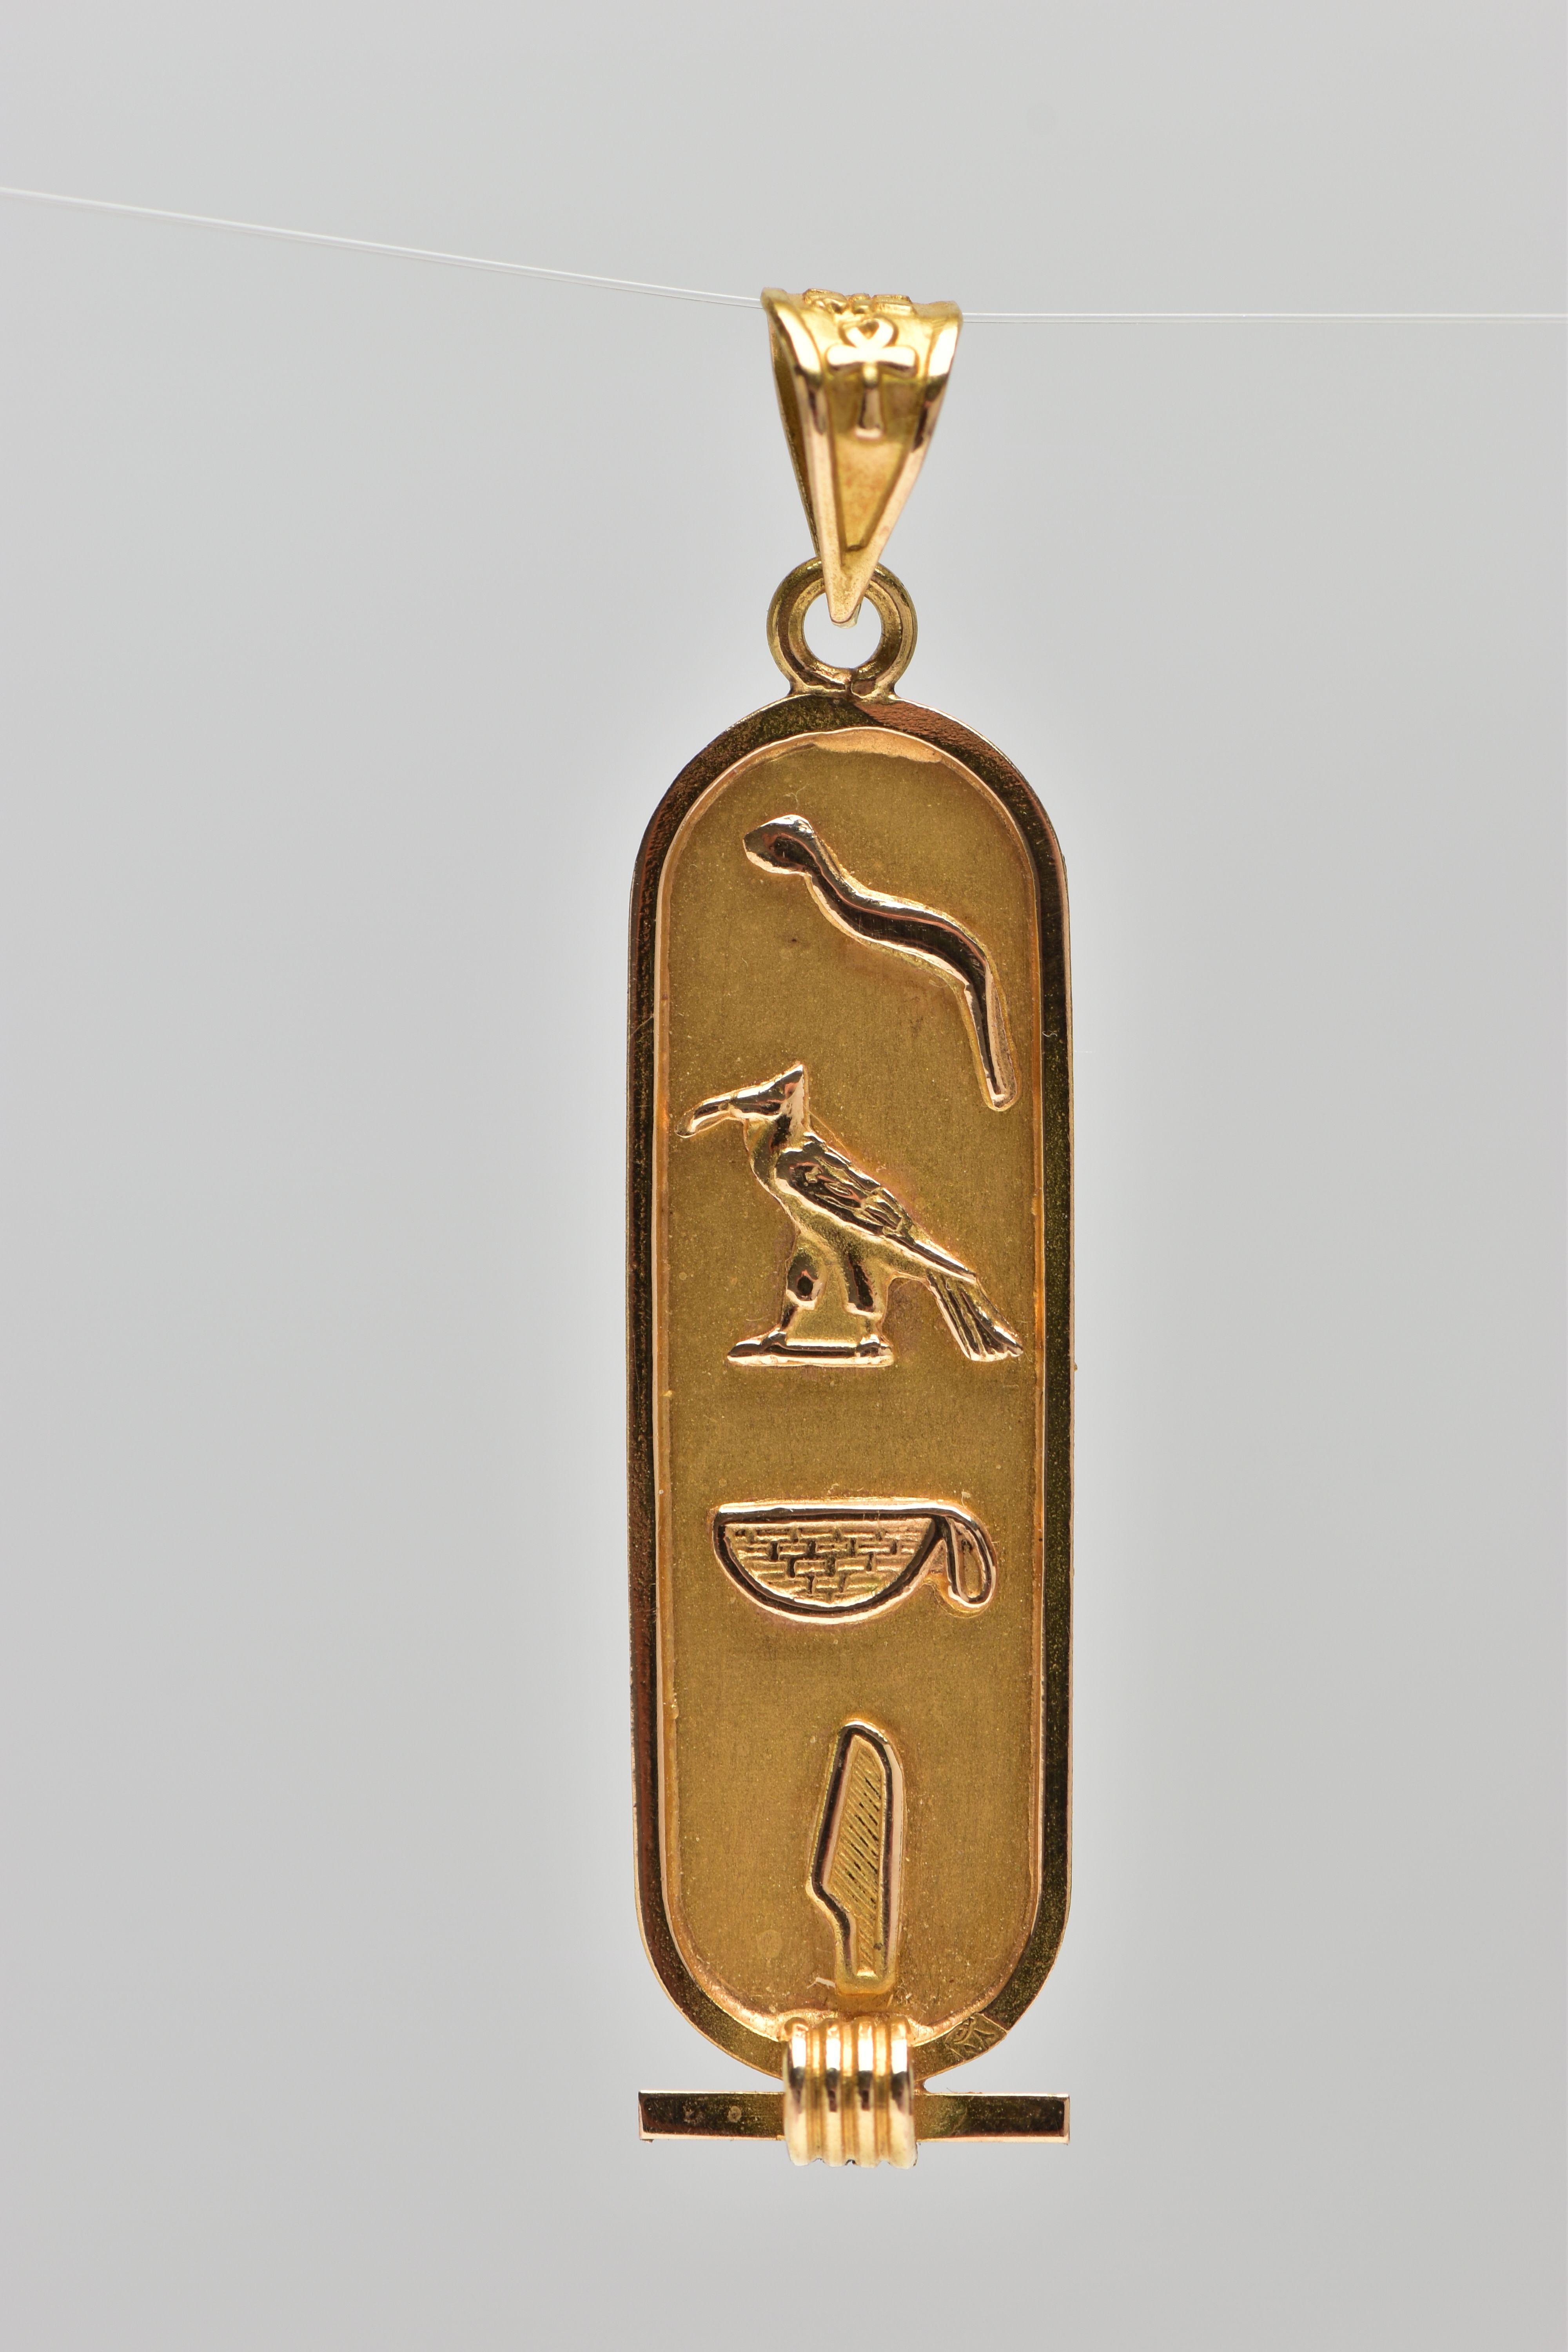 A YELLOW METAL EGYPTIAN CARTOUCHE PENDANT, of an oval outline displaying hieroglyphics, fitted